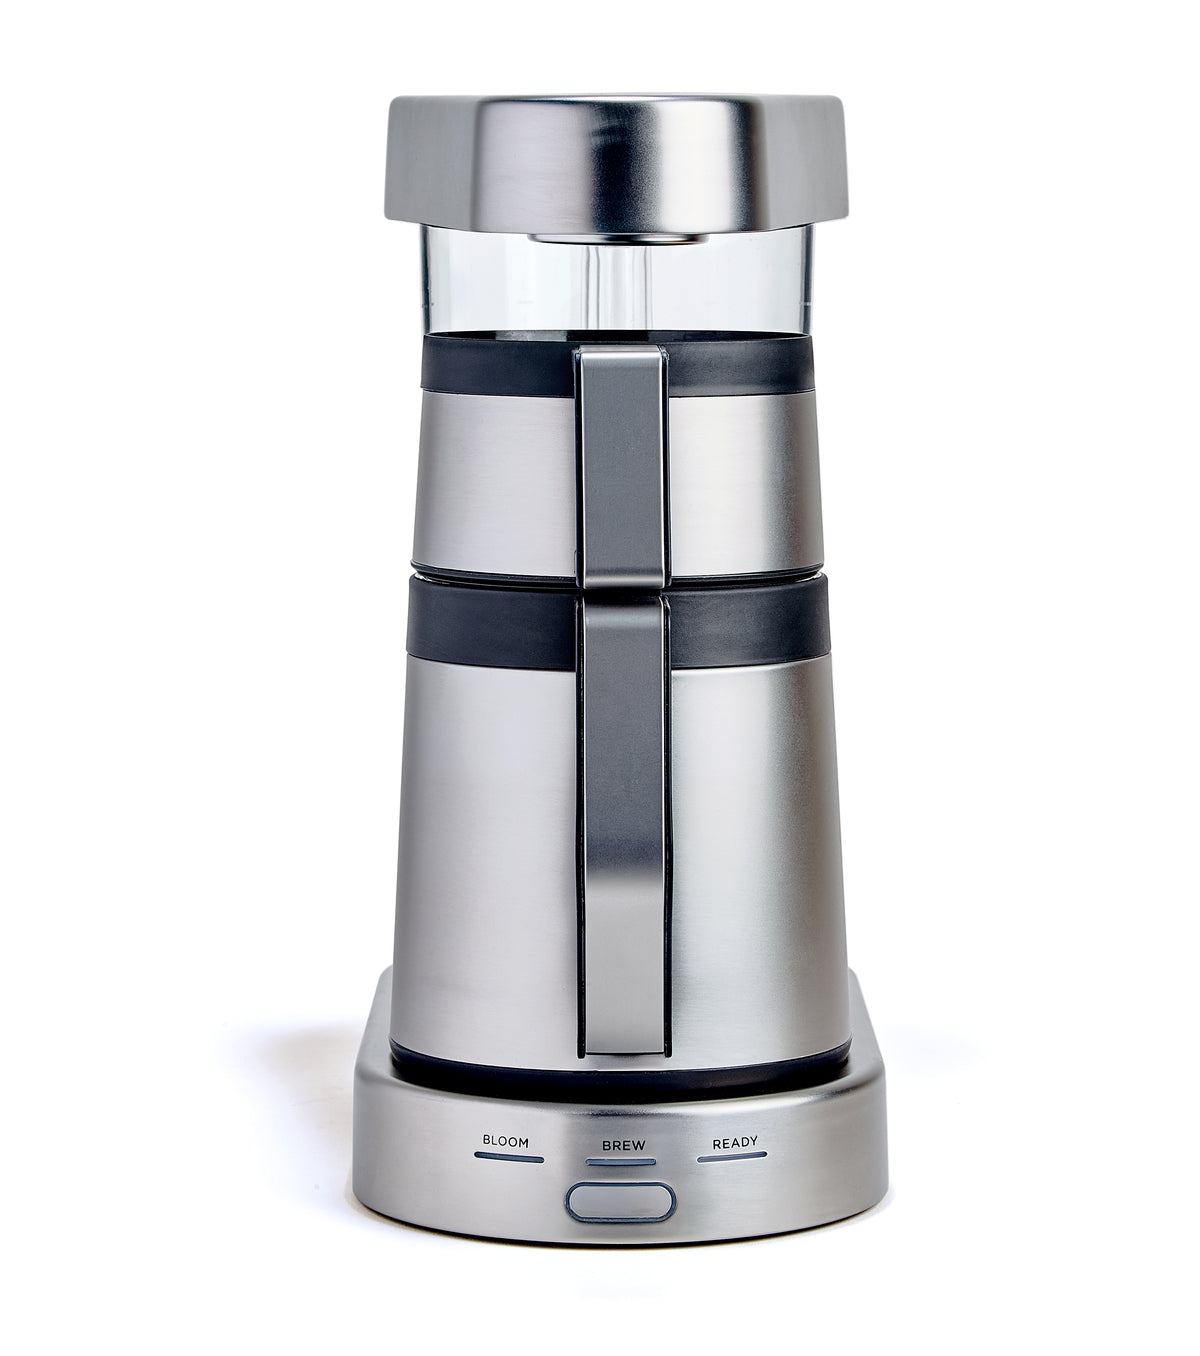 Ratio Six Coffee Maker - Matte Stainless – Whole Latte Love